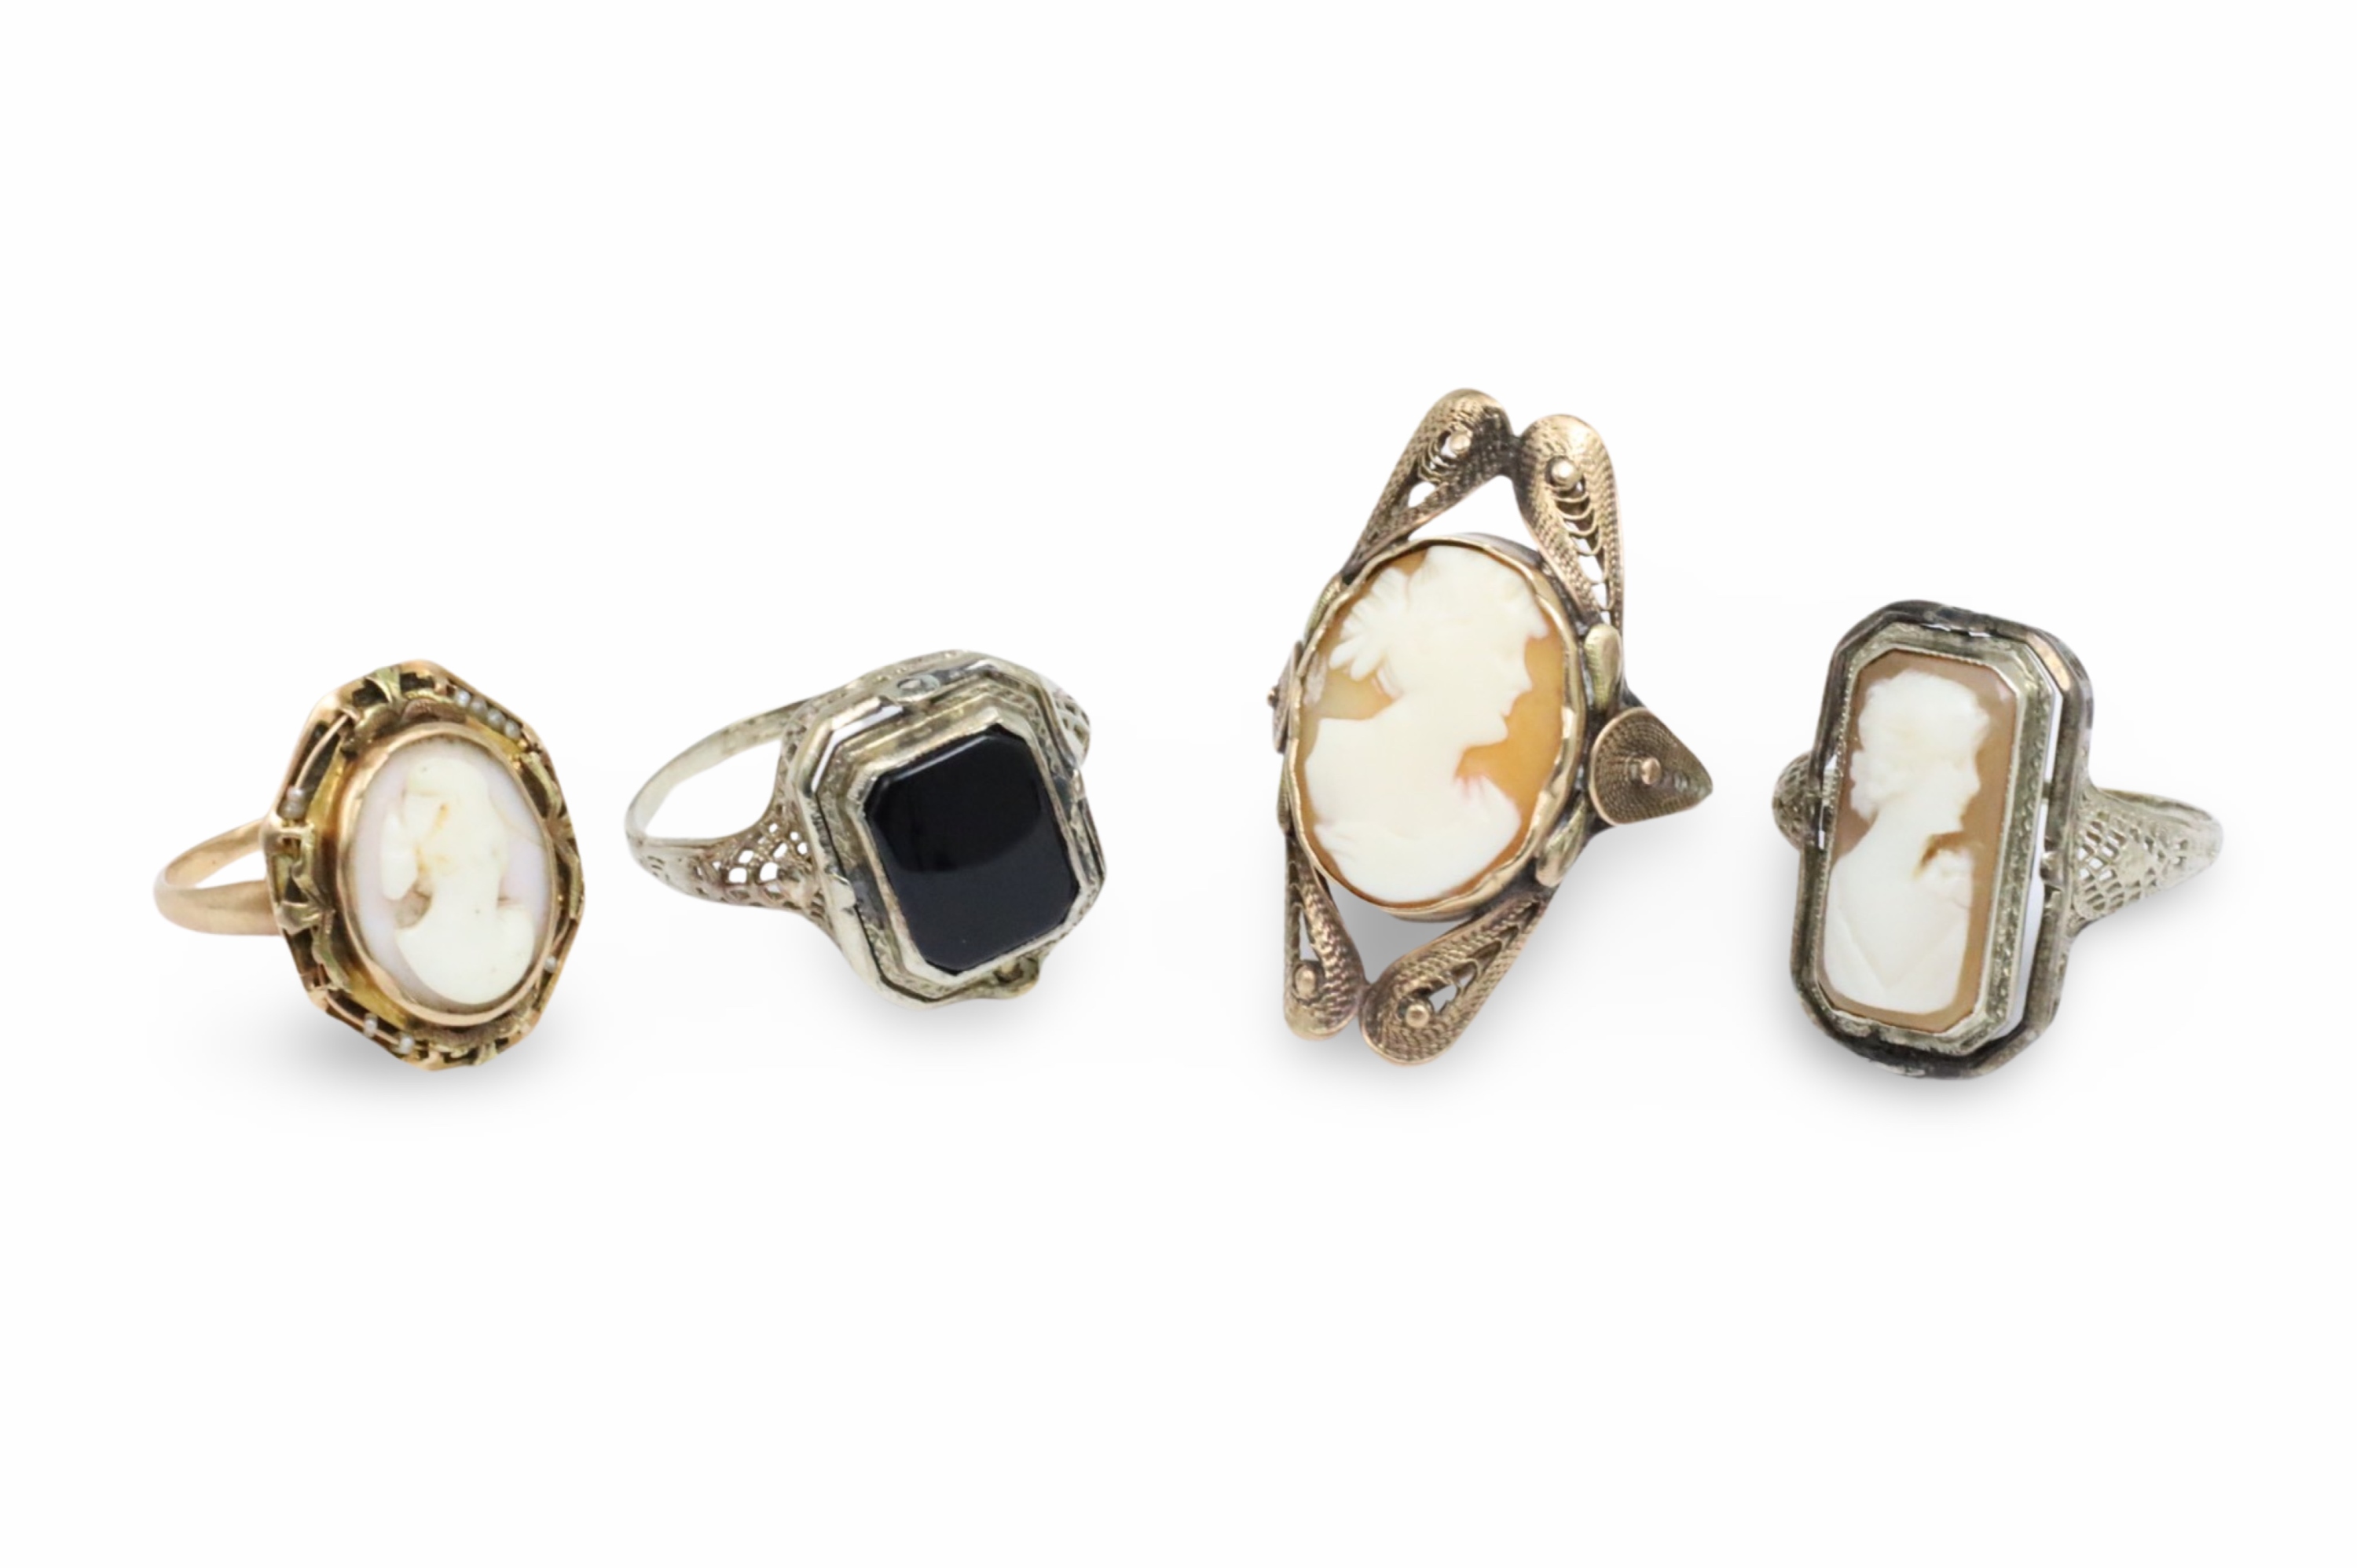 FOUR CAMEO AND SWIVEL RINGS Group 3ccb45